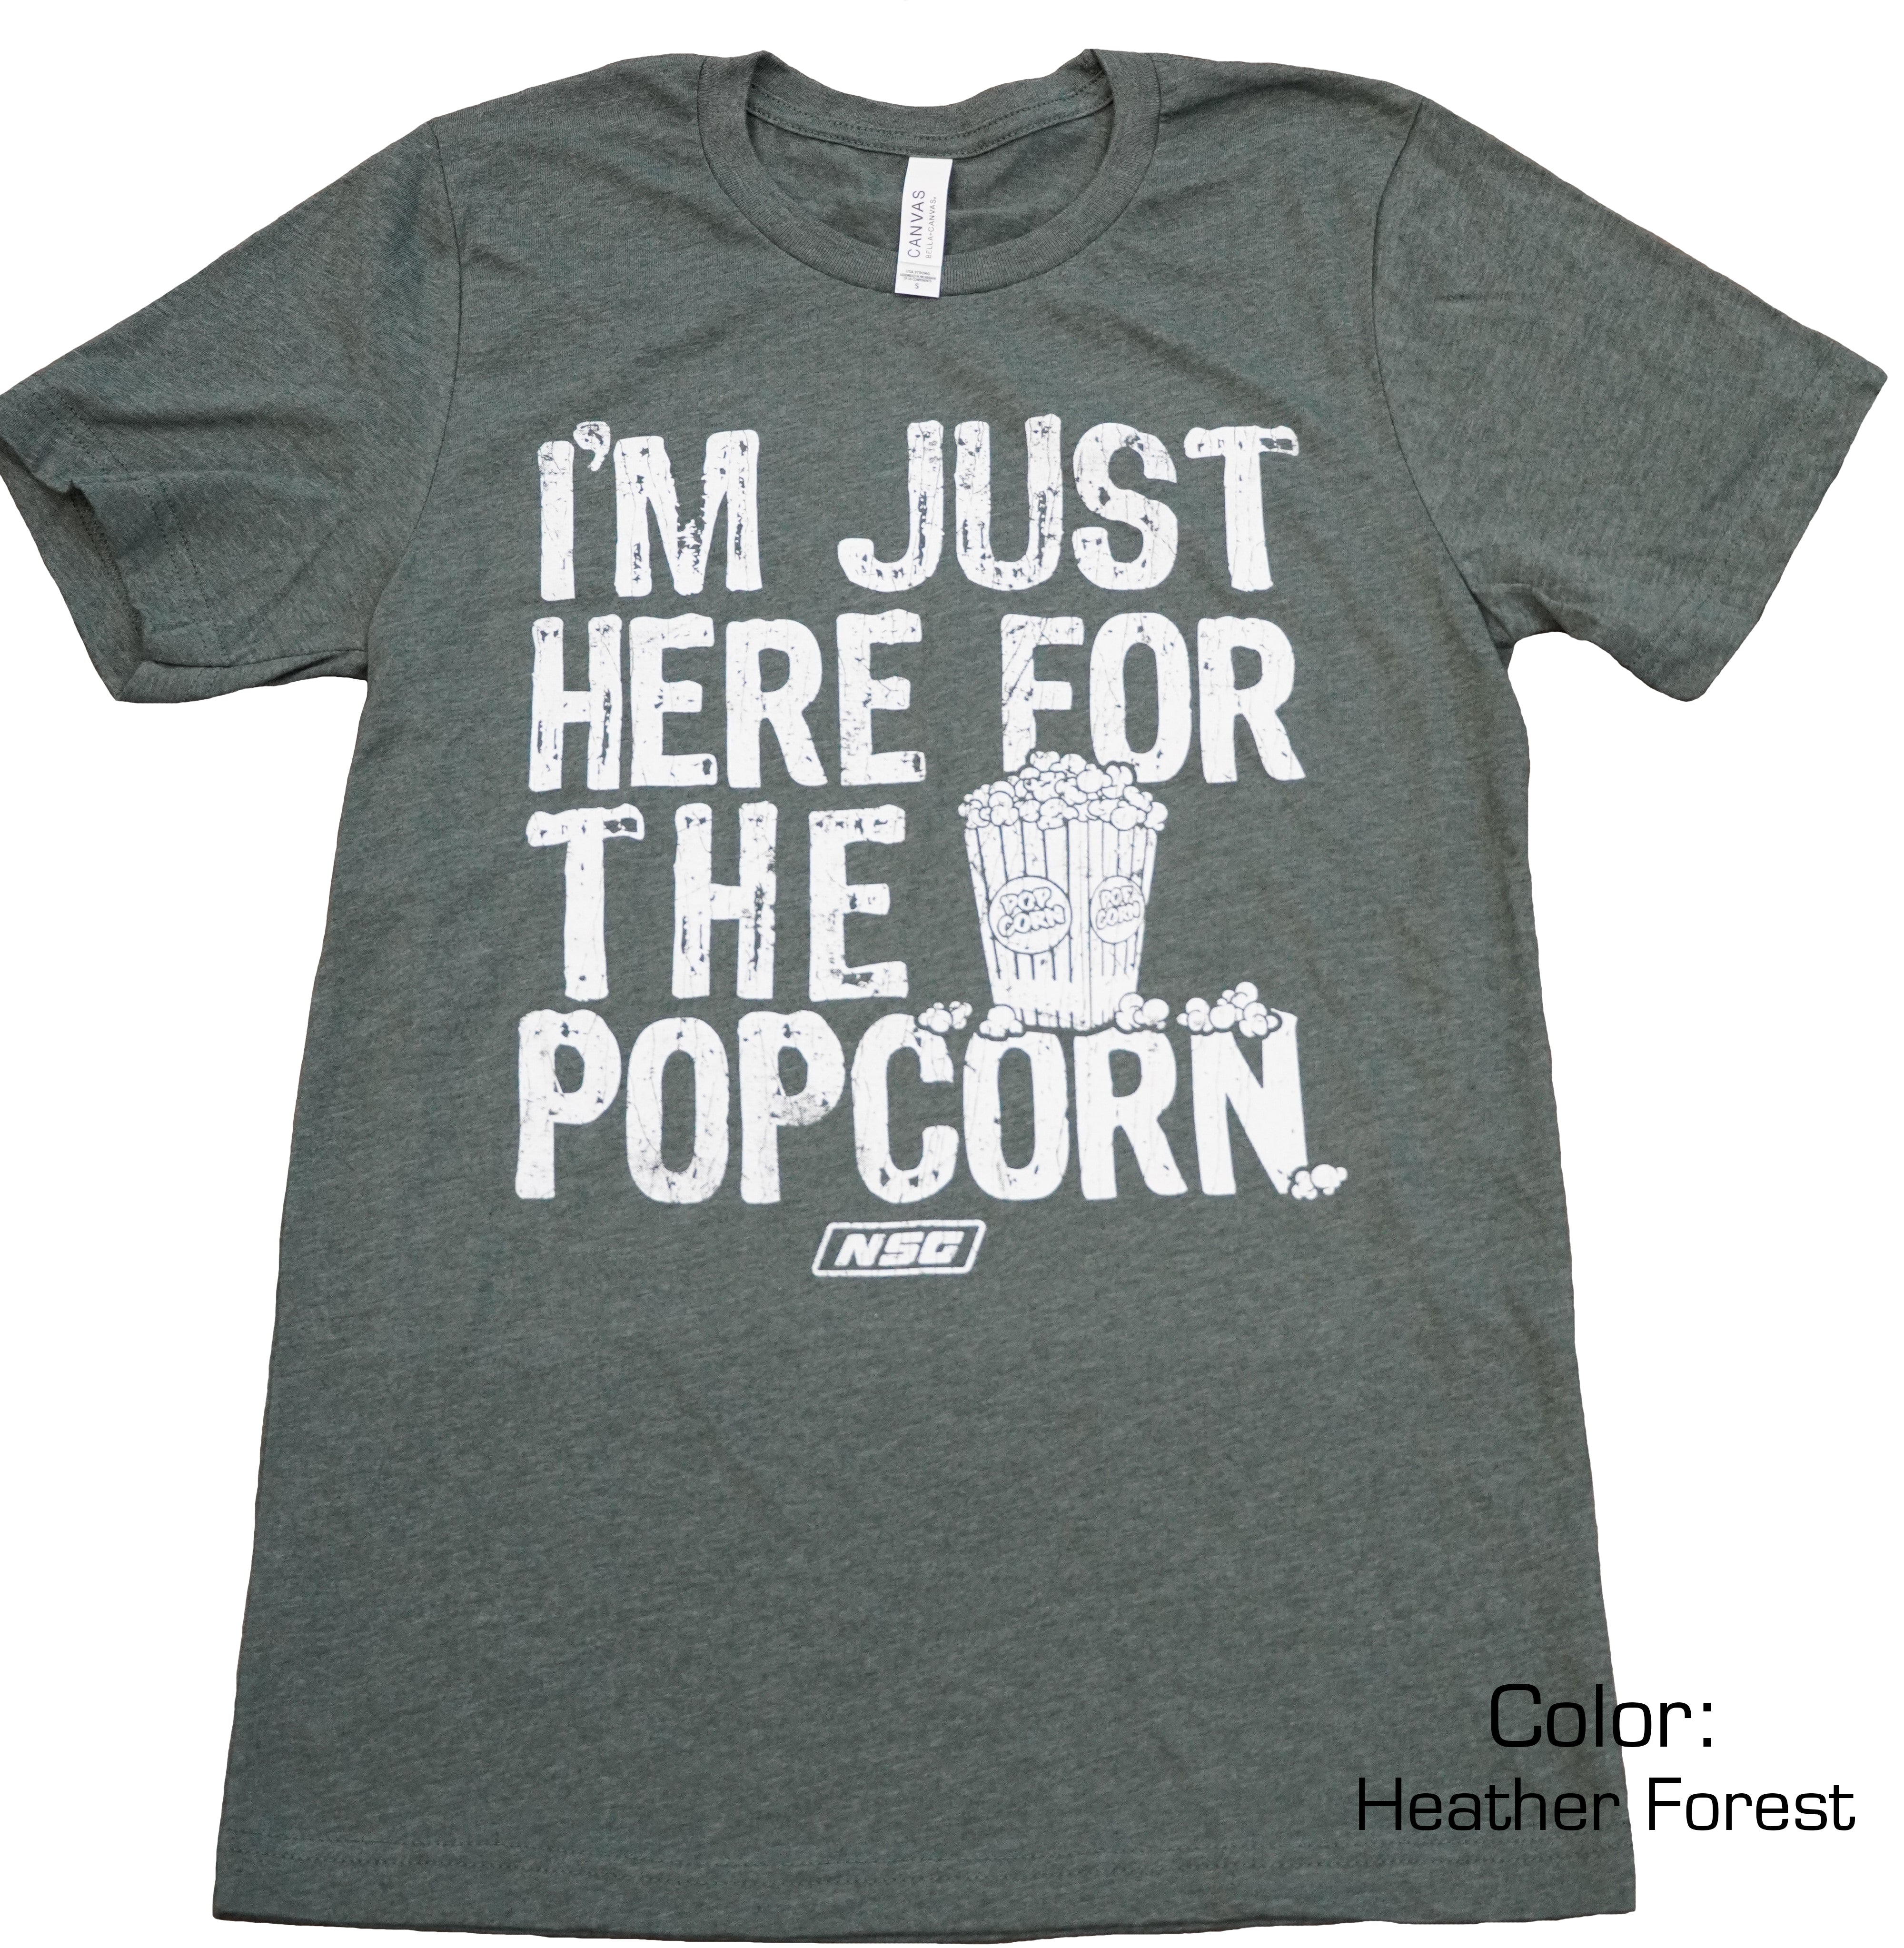 Here For The Popcorn T-Shirt